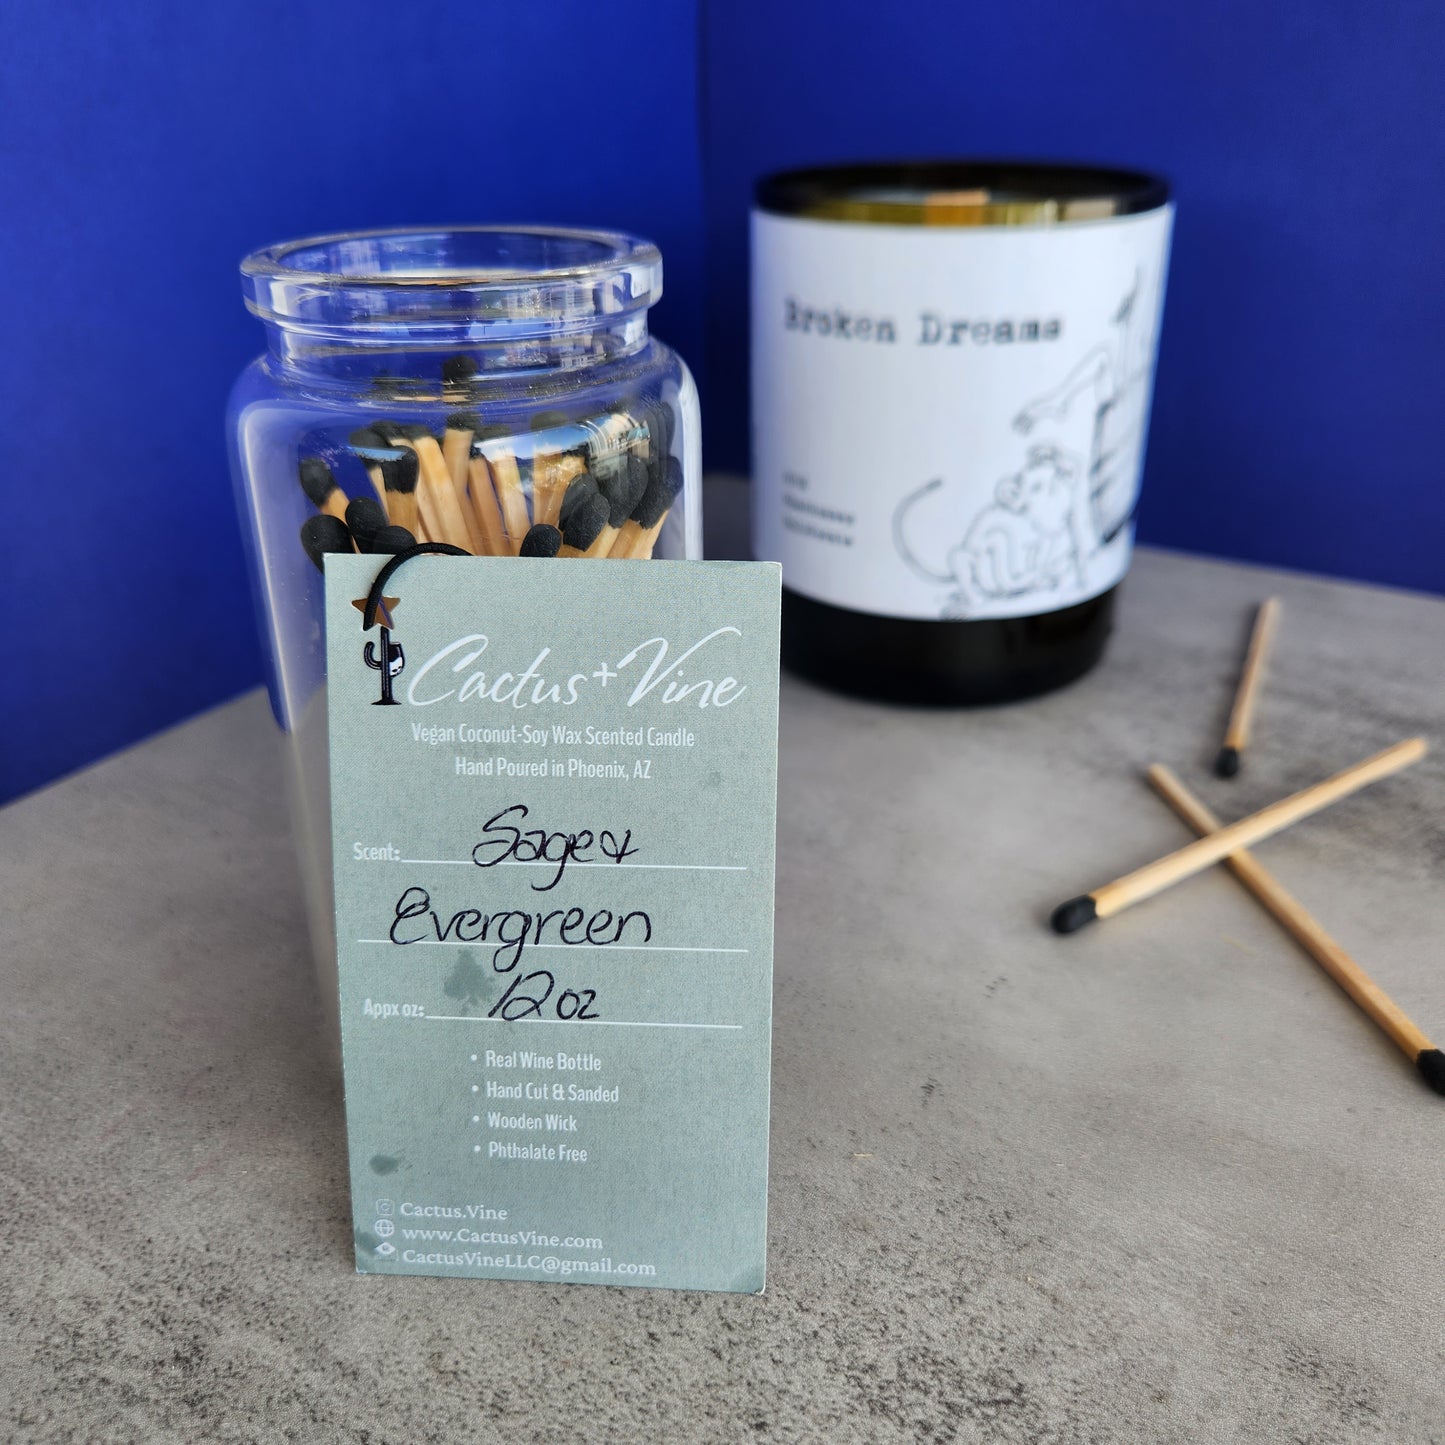 "Sage & Evergreen" Scented Candle in an Up-Cycled "Broken Dreams Chardonnay" Wine Bottle